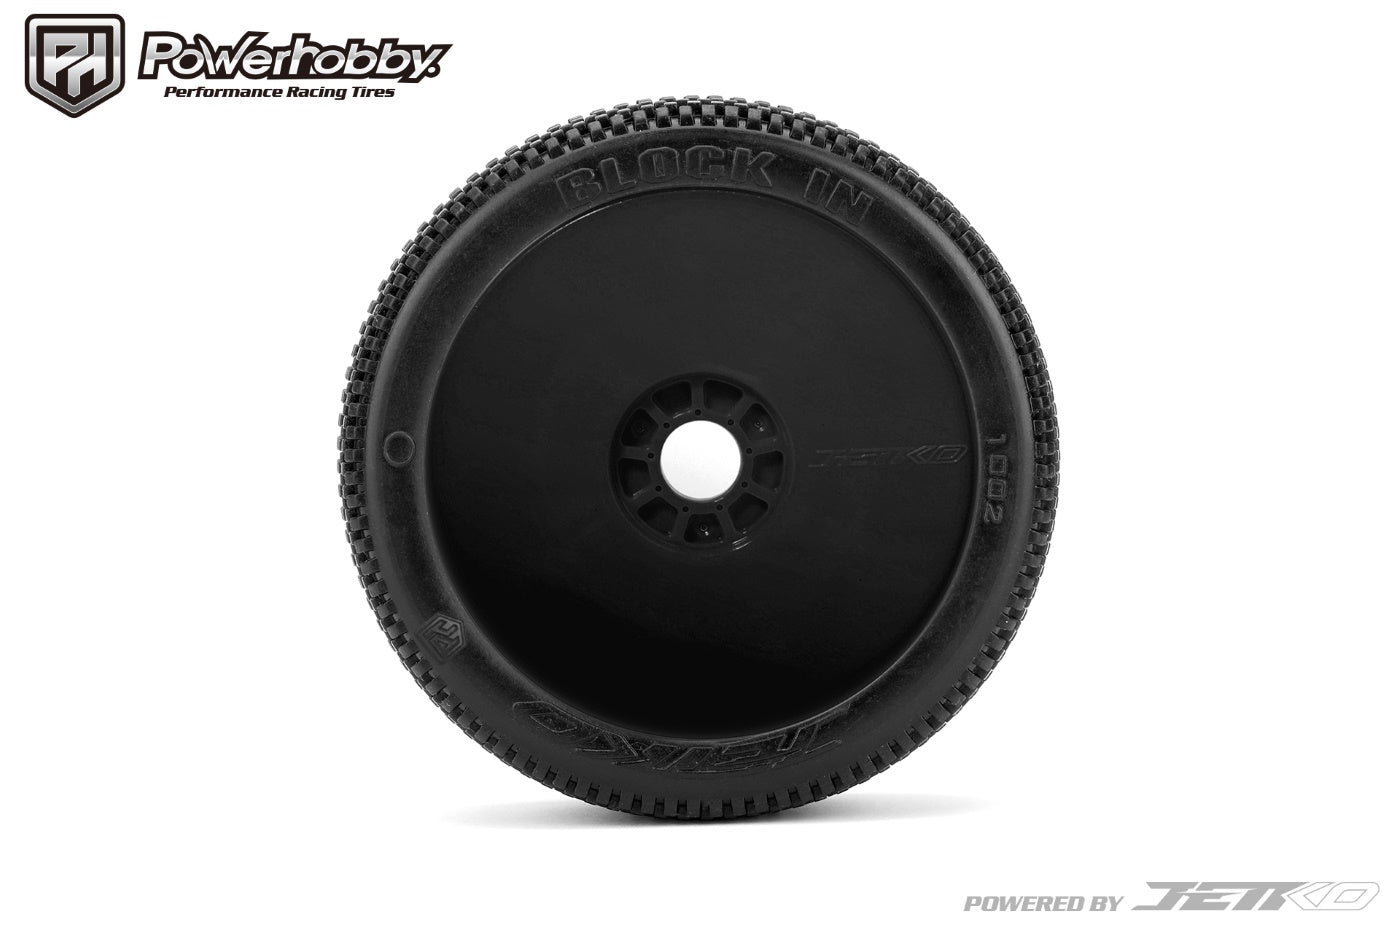 Powerhobby Block In 1/8 Buggy Mounted Tires White (2) Super Soft - PowerHobby